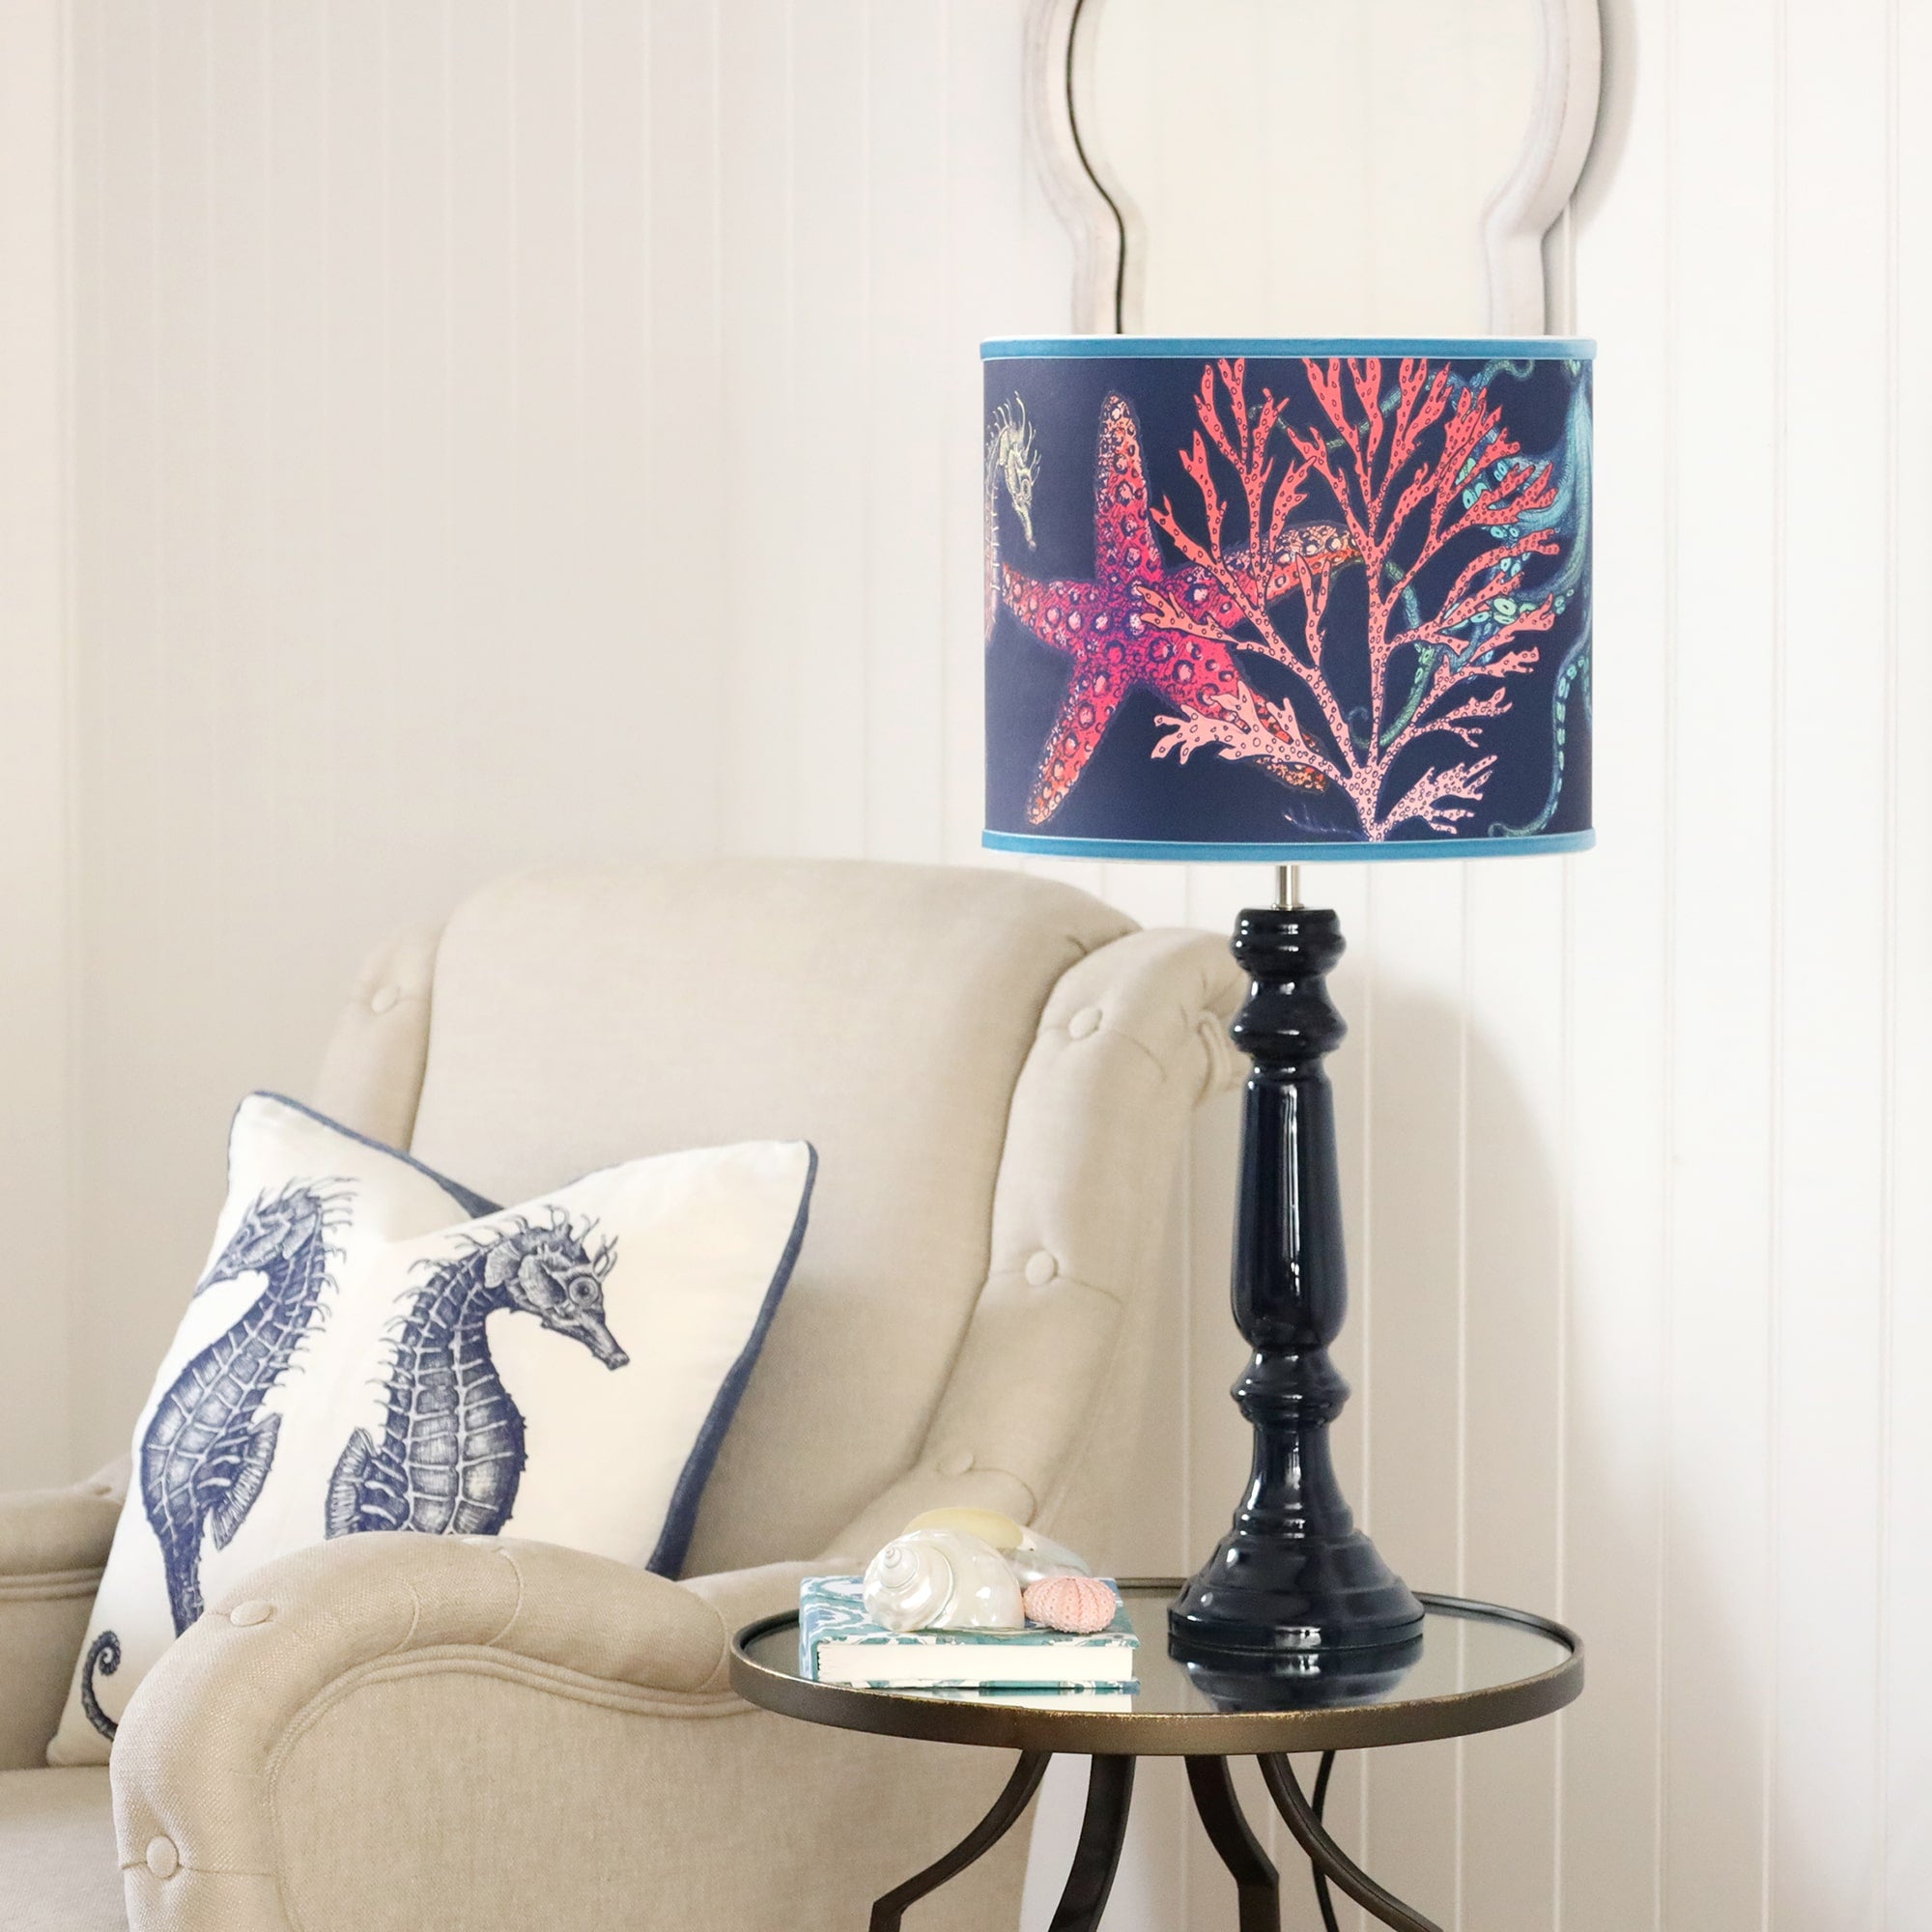 Navy Lacquer Zennor lampbase with a navy reef lampshade on a mirror table.On the table is a notebook with some shells placed on it.Next to the table is a chair with a seahorse cushion